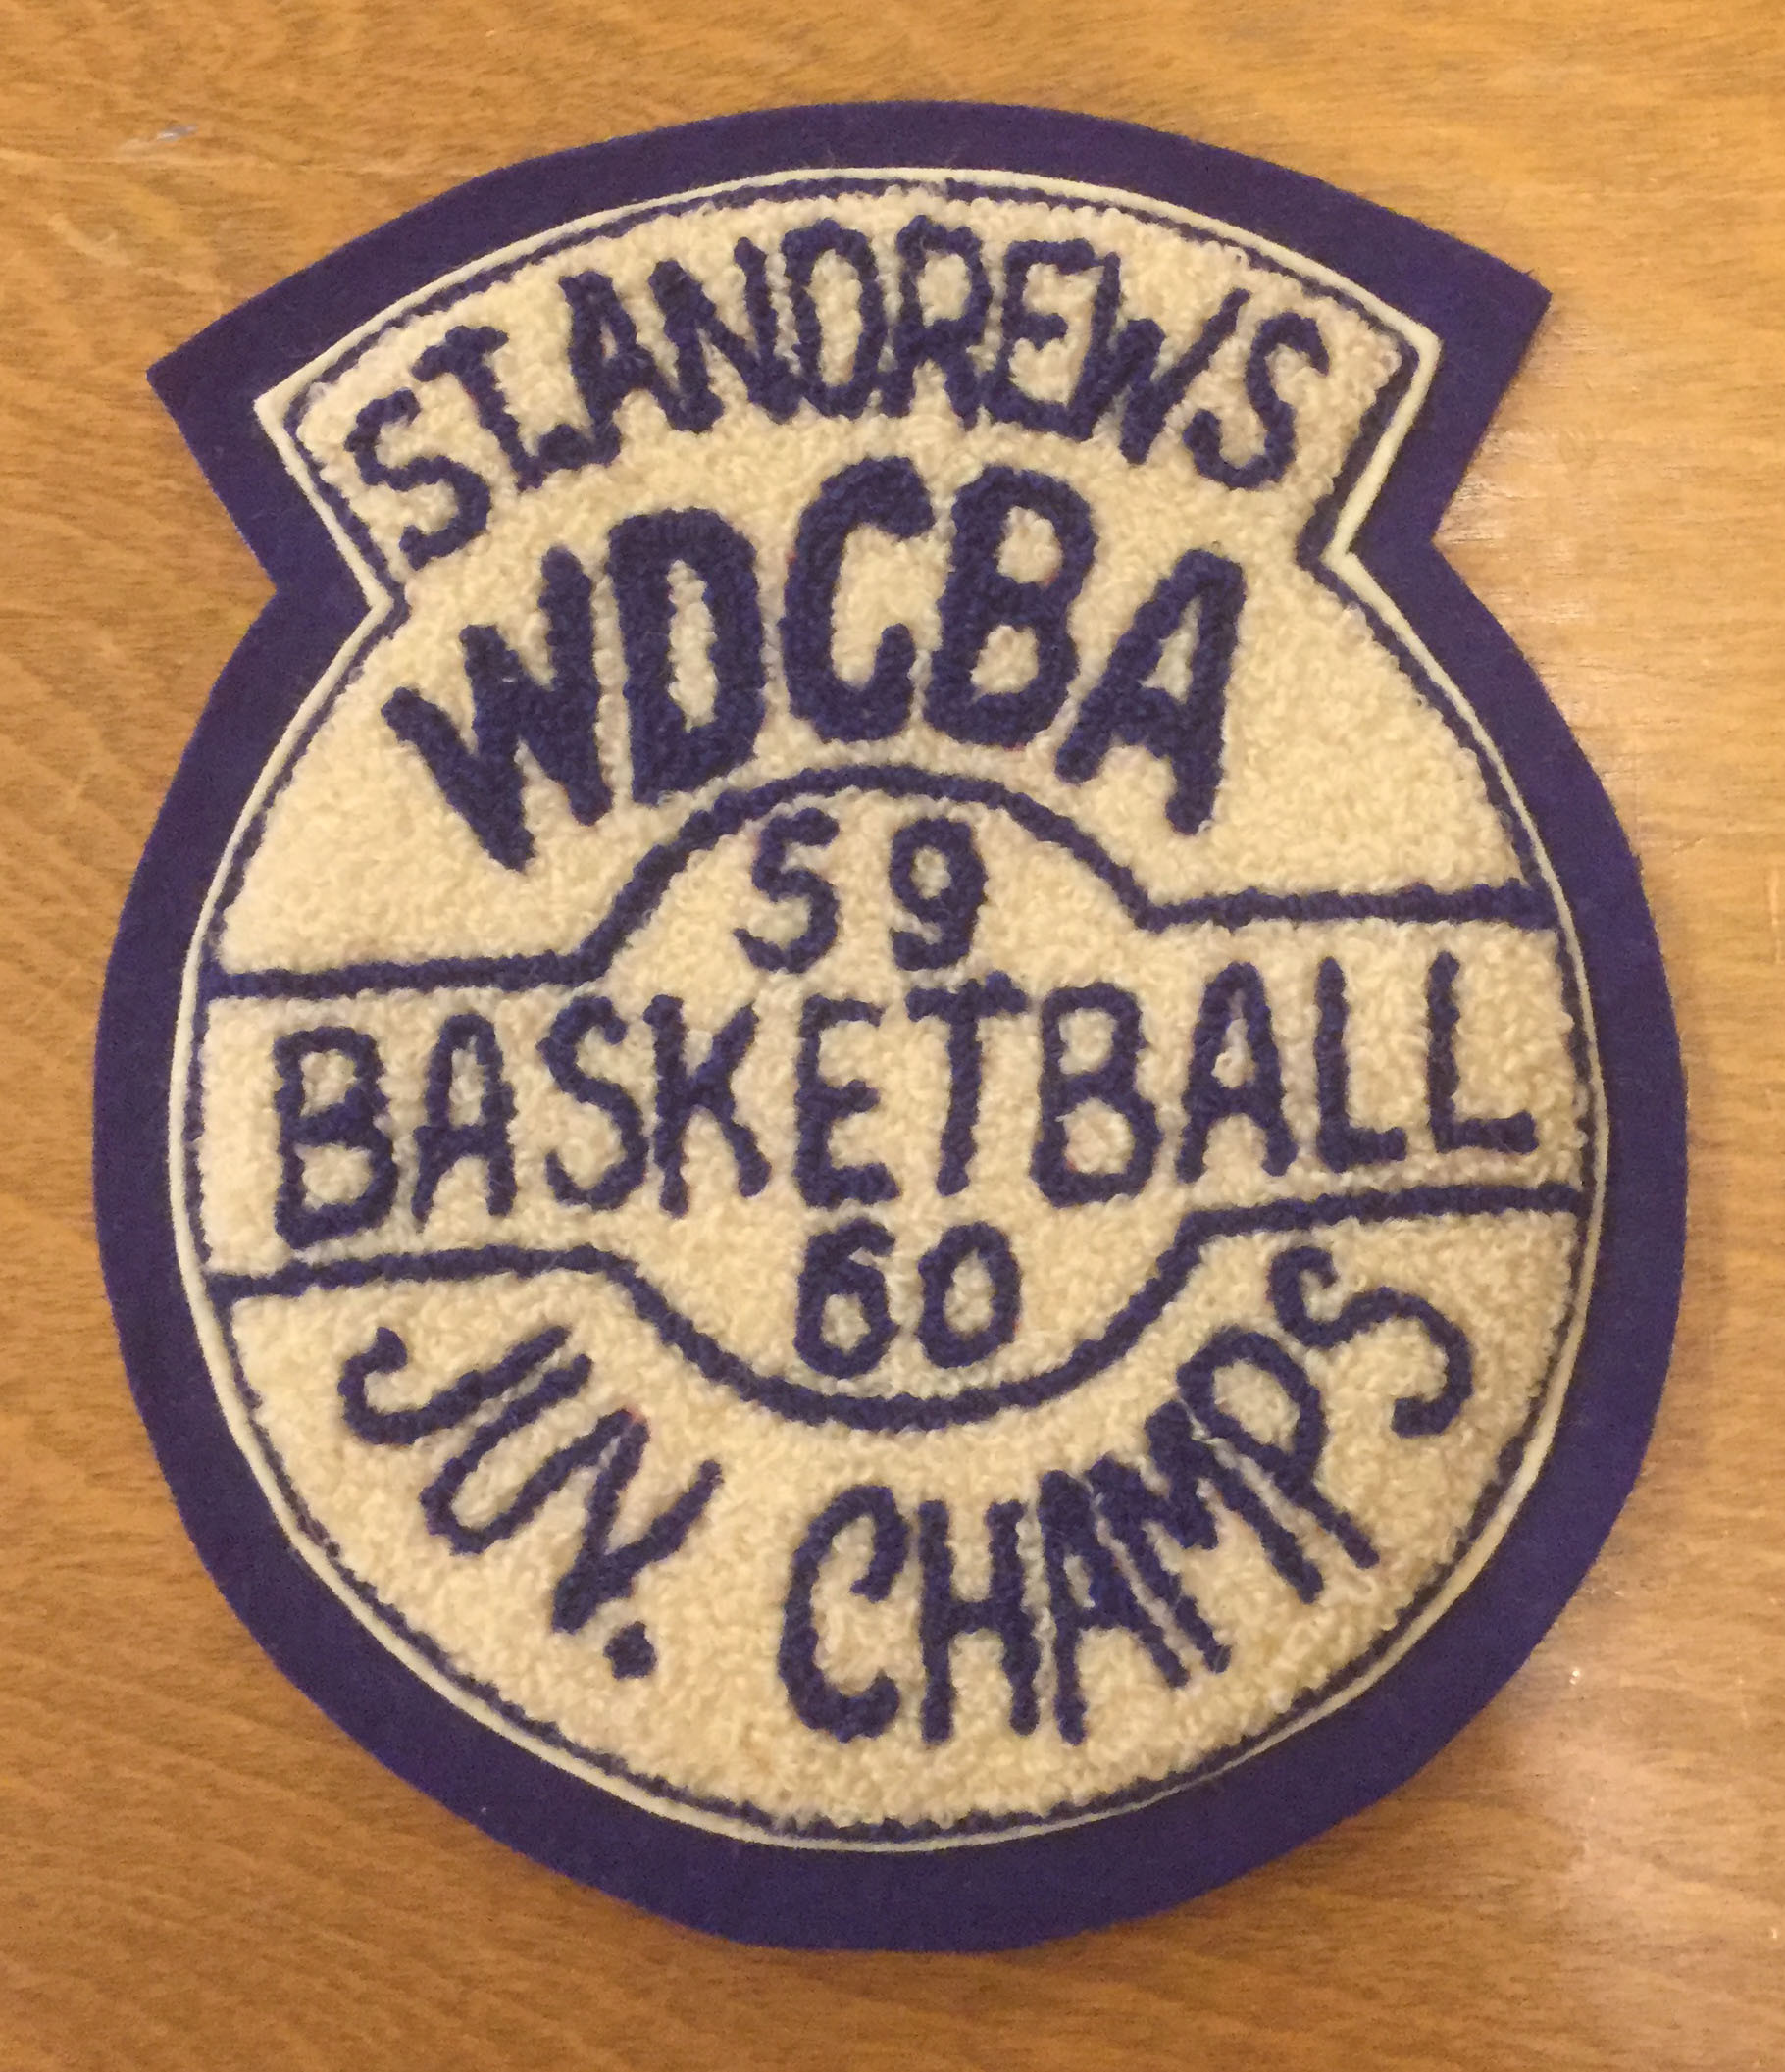 colour%20photo%20of%20St.%20Andrew%27s%20Church%20basketball%20champions%20sports%20patch%2C%201959-60